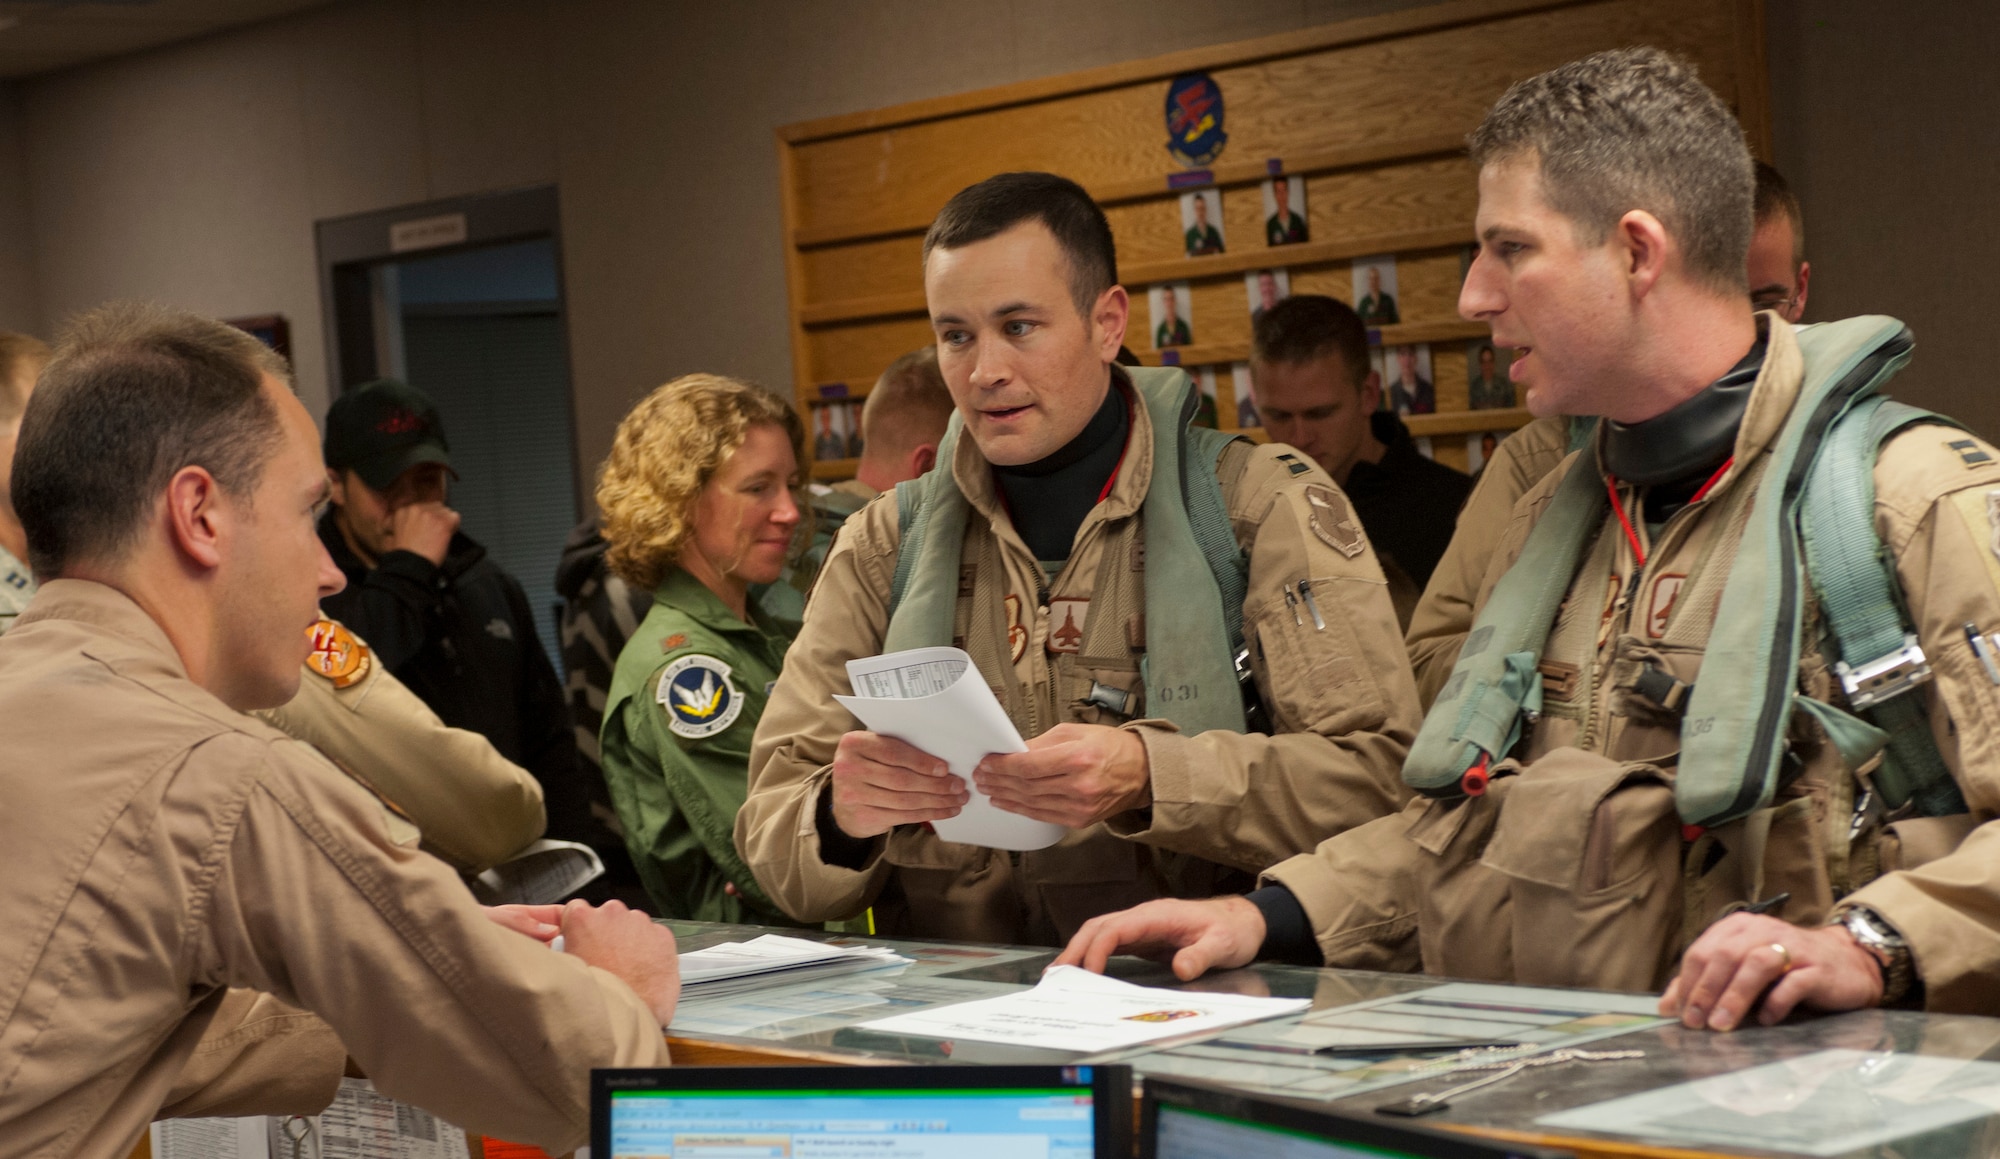 Royal Australian Air Force Flight Lt. Michael Galton (left), 389th Fighter Squadron assistant director of operations, speaks with U.S. Air Force Capt. Craig Sanders, 389th FS chief of mission planning, and Capt. Travis Stephens, 389th FS assistant director of operations, at the 389th FS operations desk at Mountain Home Air Force Base, Idaho, April 21, 2013. Members from the 389th FS deployed to Southwest Asia to assist ground commanders in combat operations. (U.S. Air Force photo/Staff Sgt. Roy Lynch) (Released)